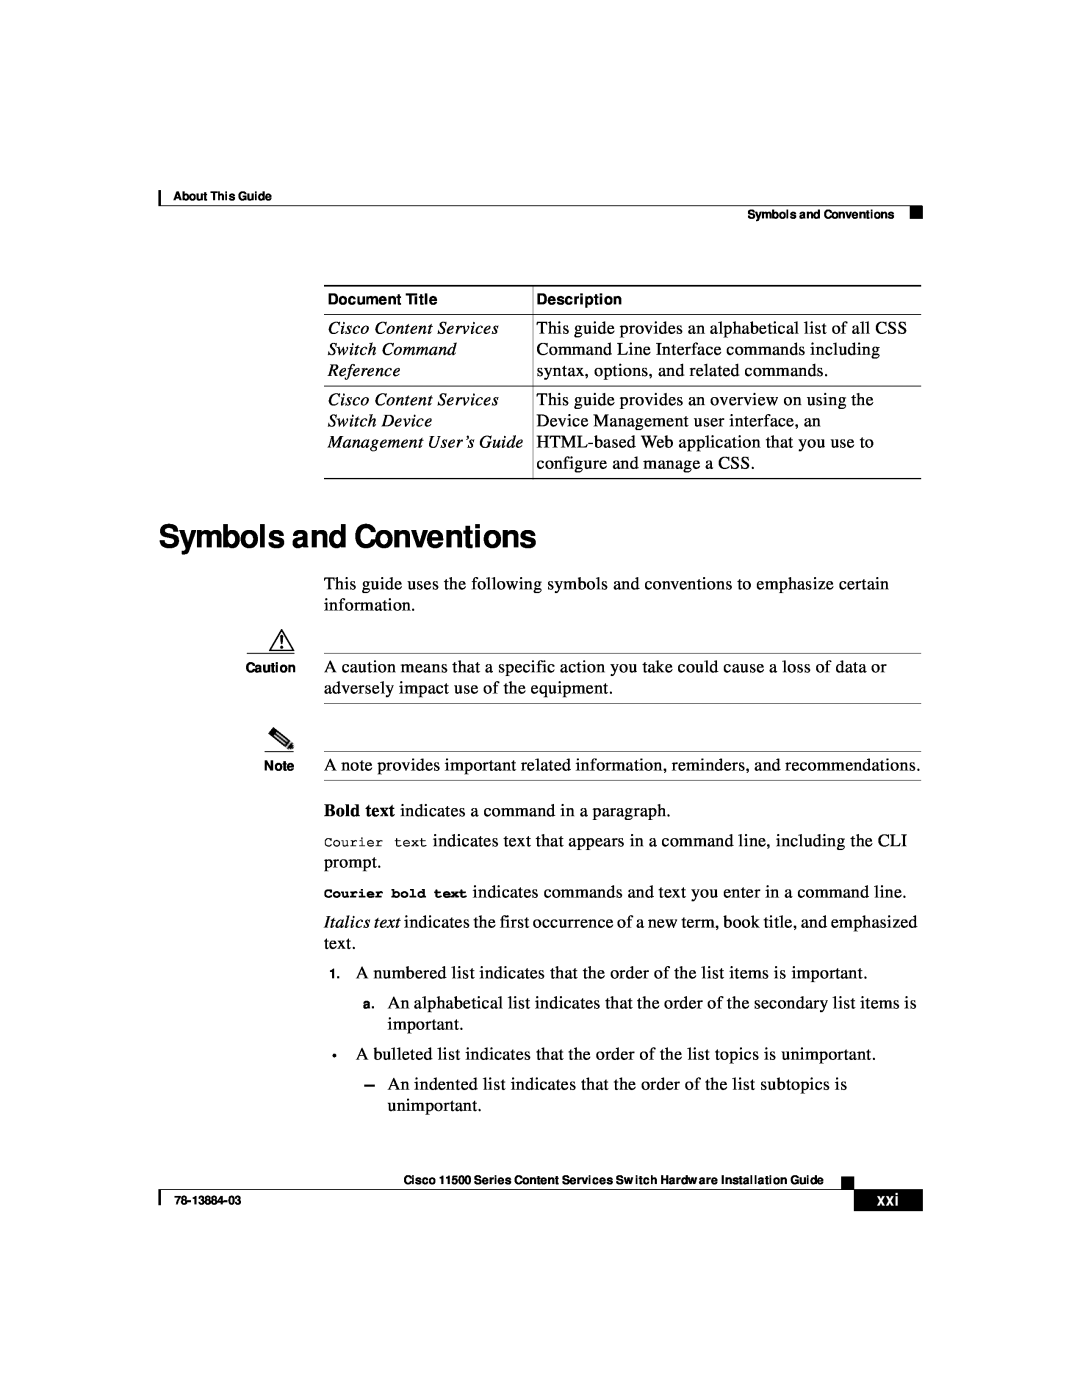 Cisco Systems 11500 Series manual Symbols and Conventions, Document Title, Description 